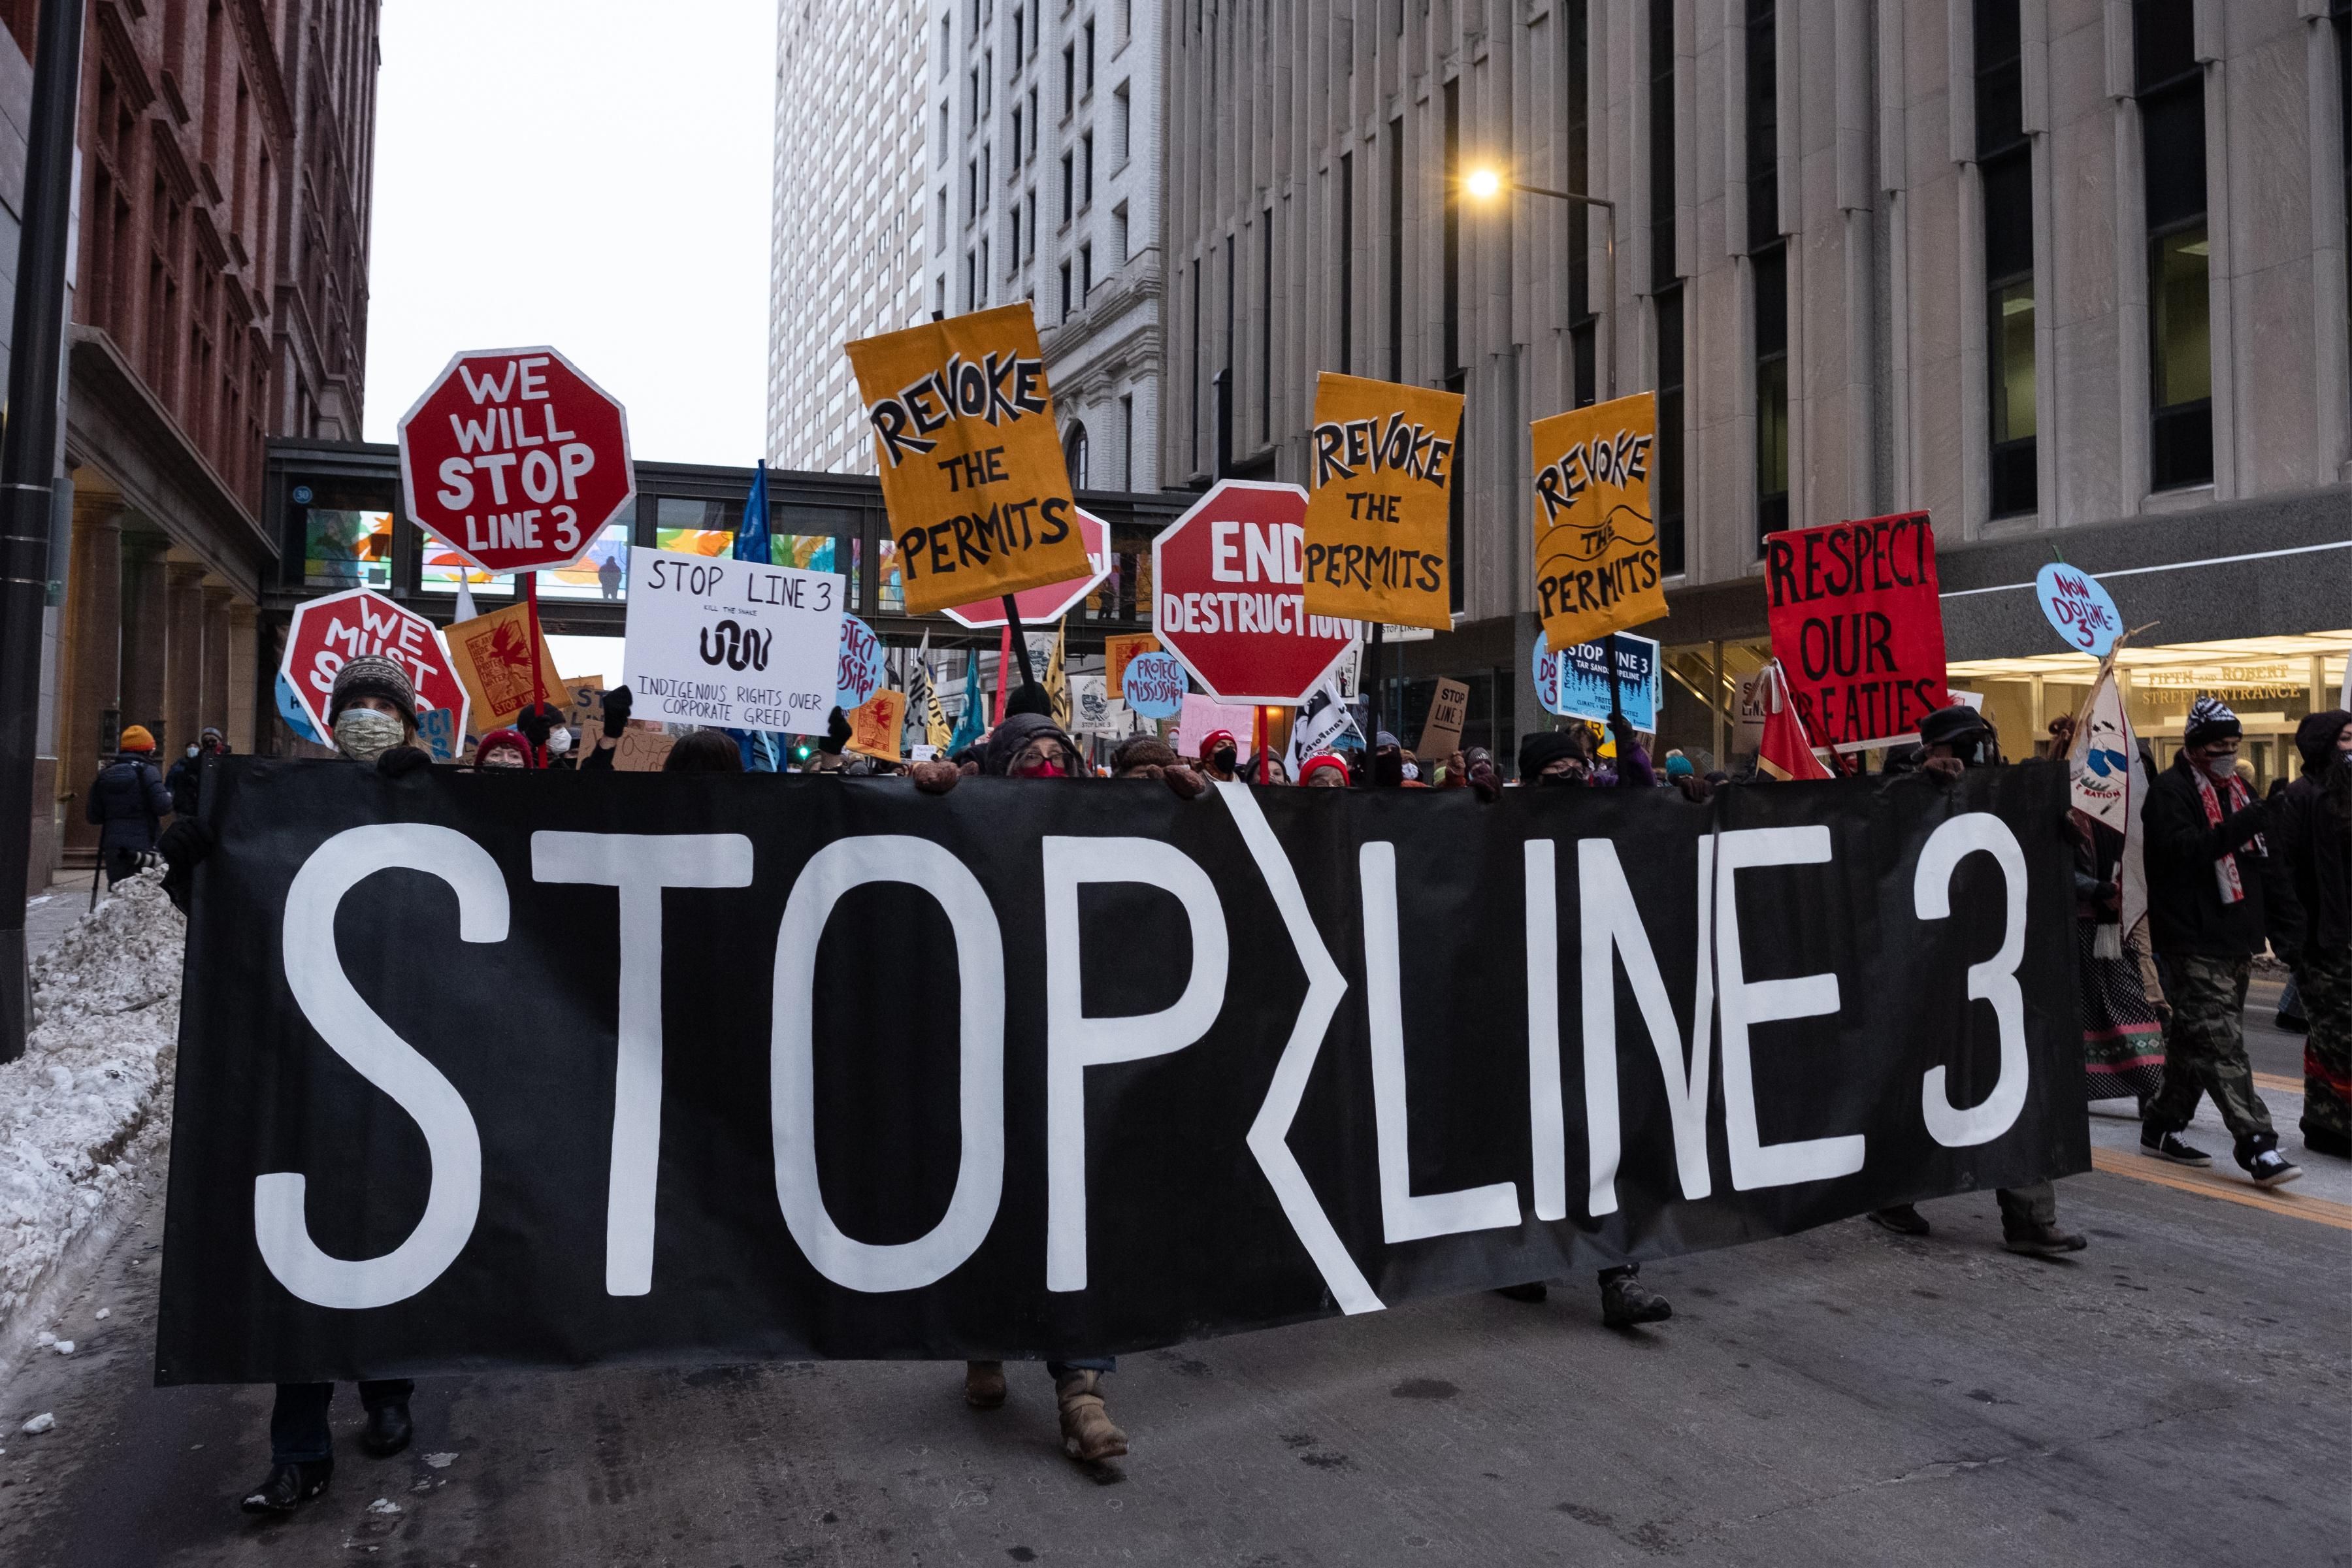 Demonstrators march through downtown St. Paul, Minnesota with a Stop Line 3 banner on January 29, 2021. (Photo: Tim Evans/NurPhoto via Getty Images)